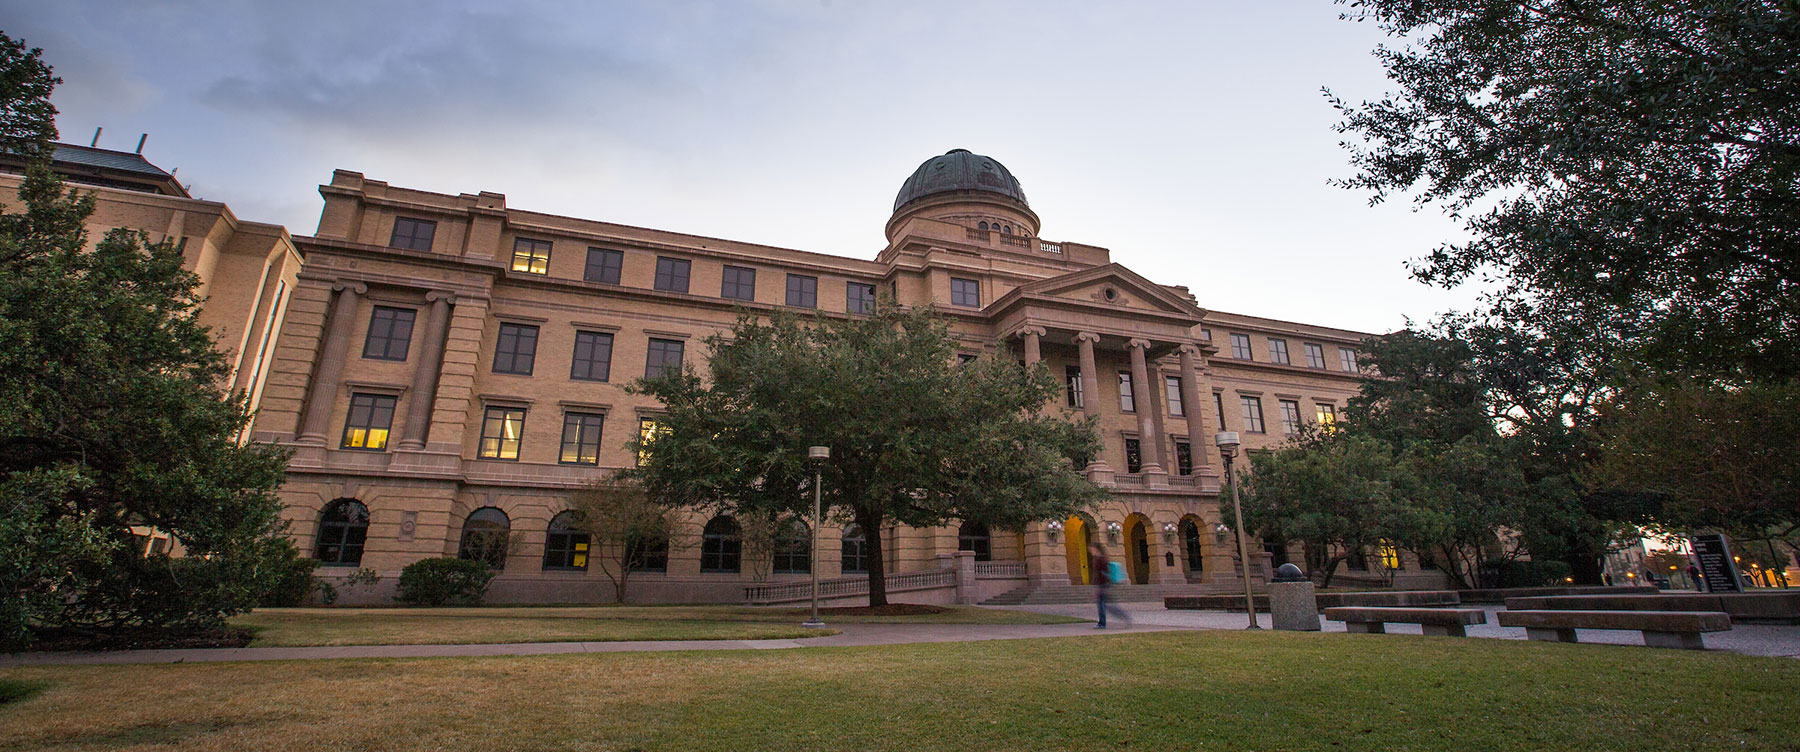 The Academic Building on Texas A&M Campus